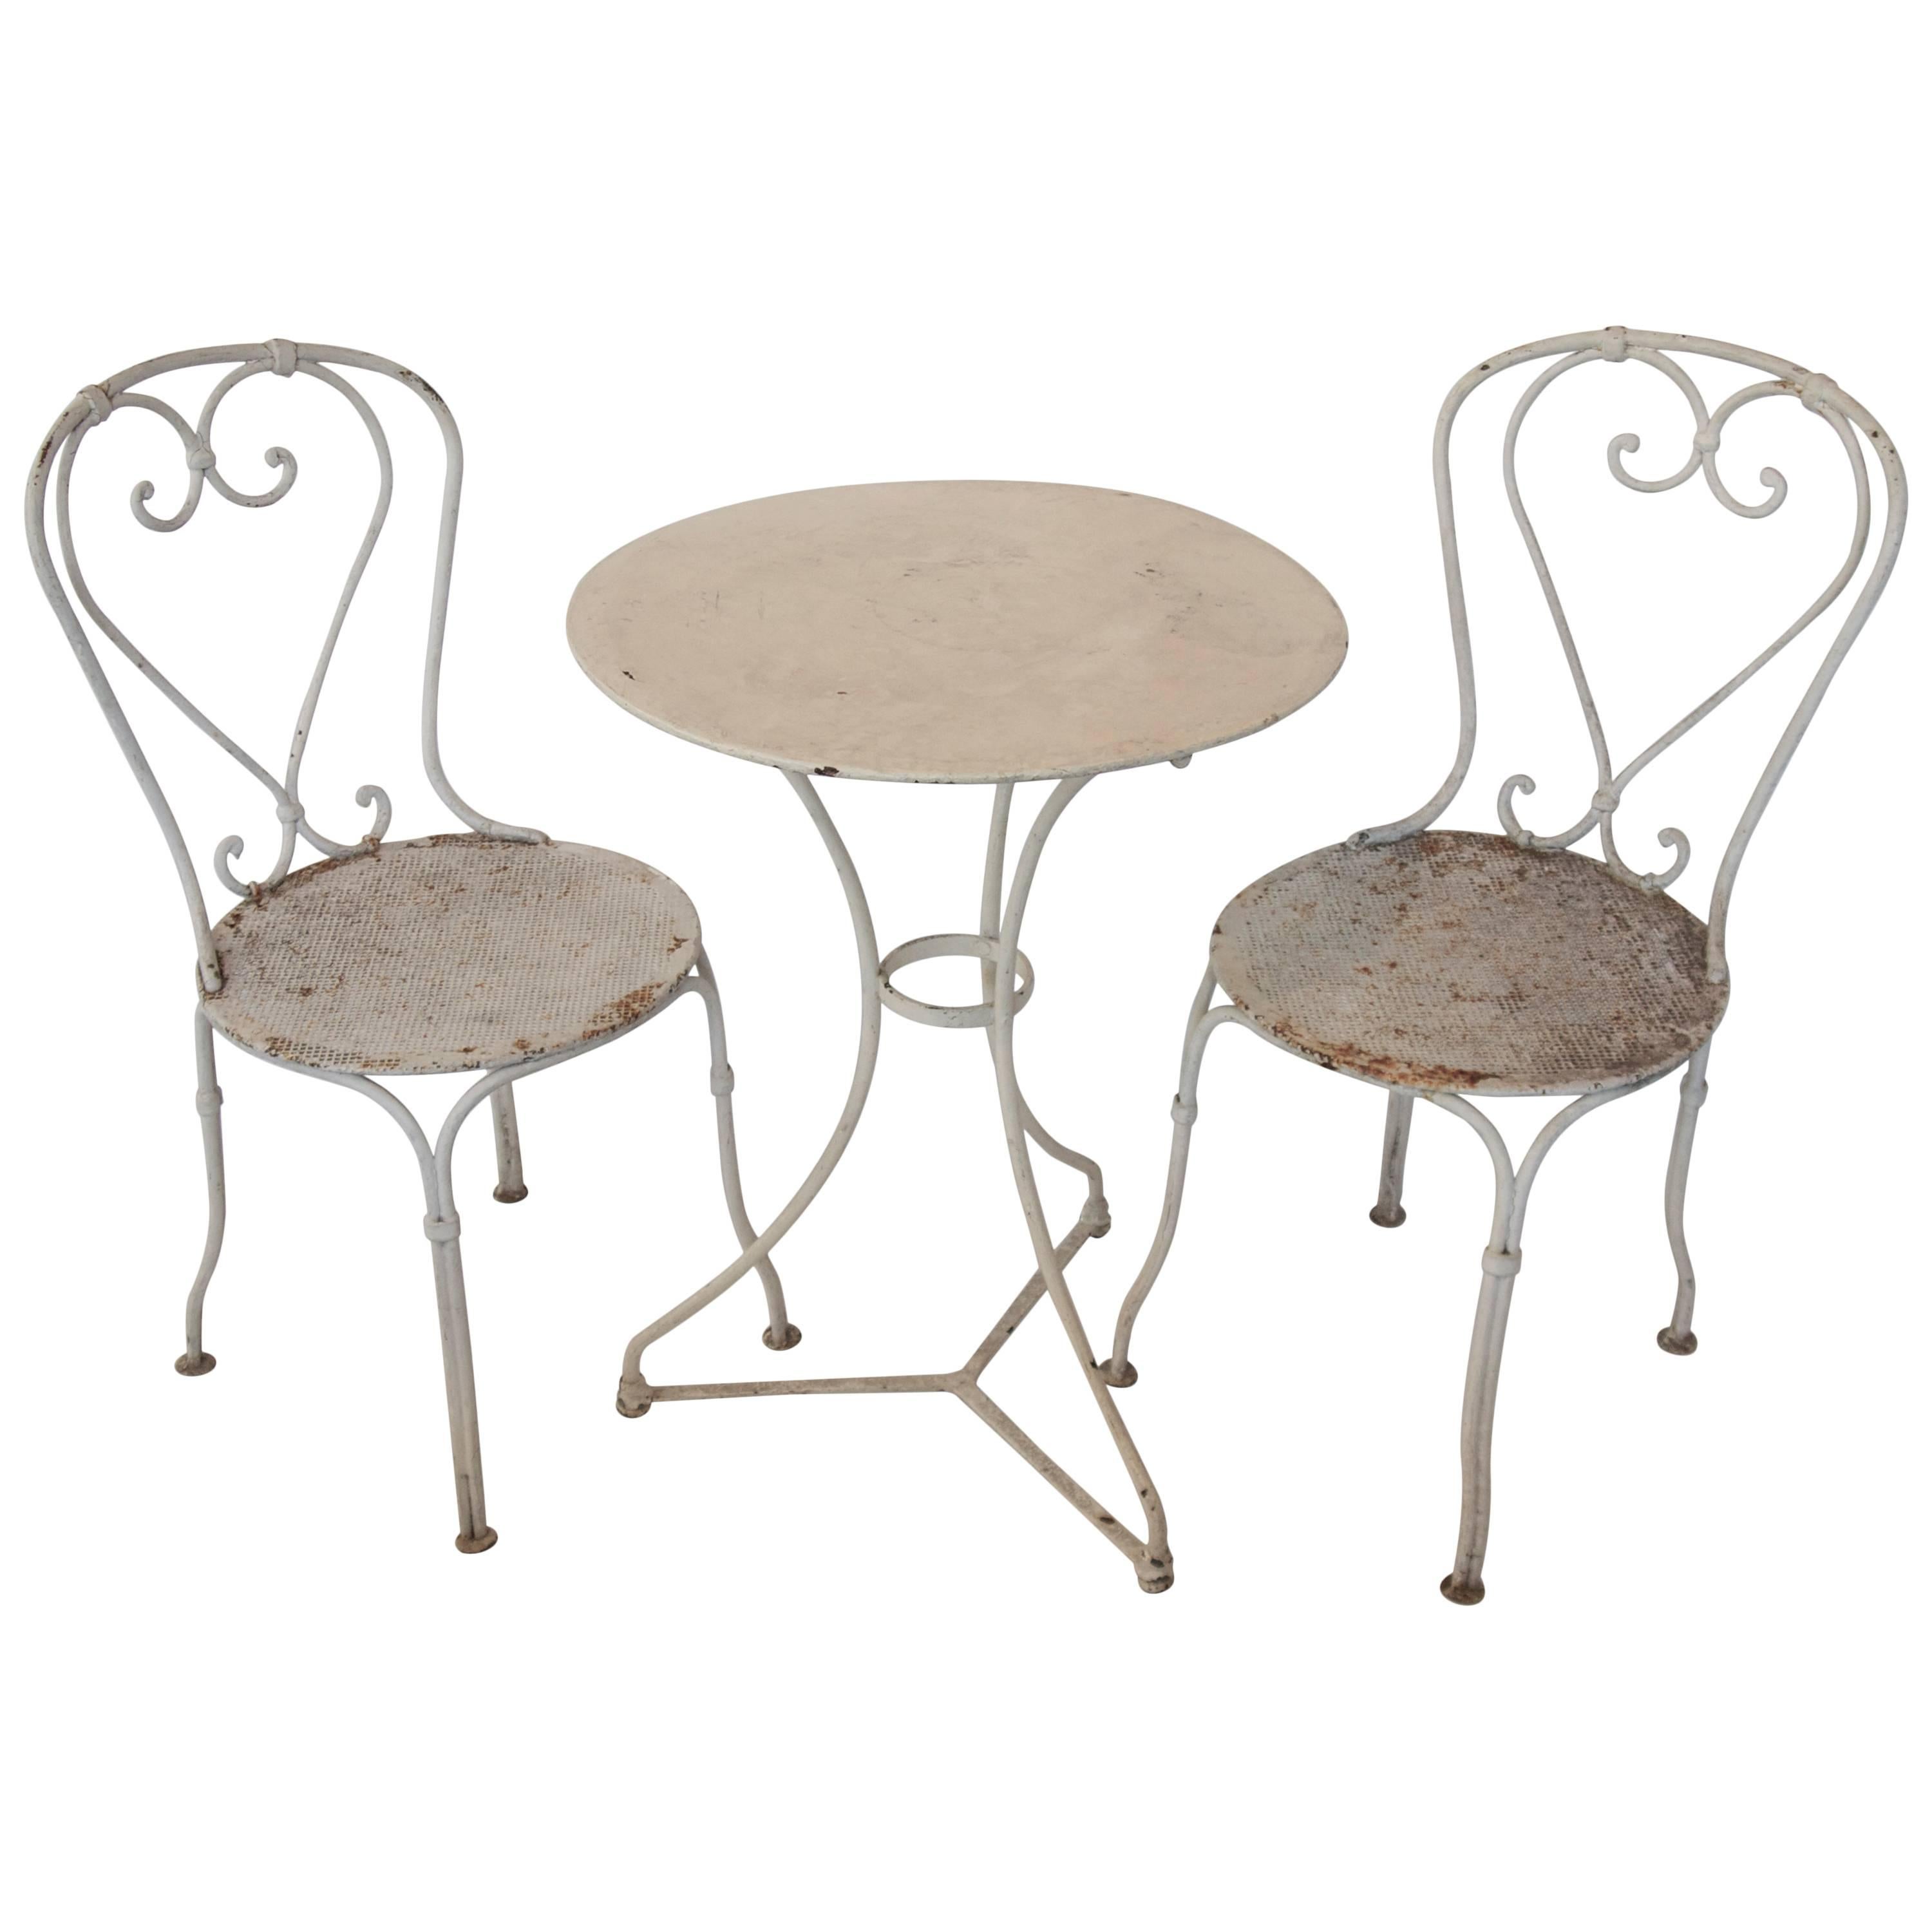 French Garden Table and Chairs Set